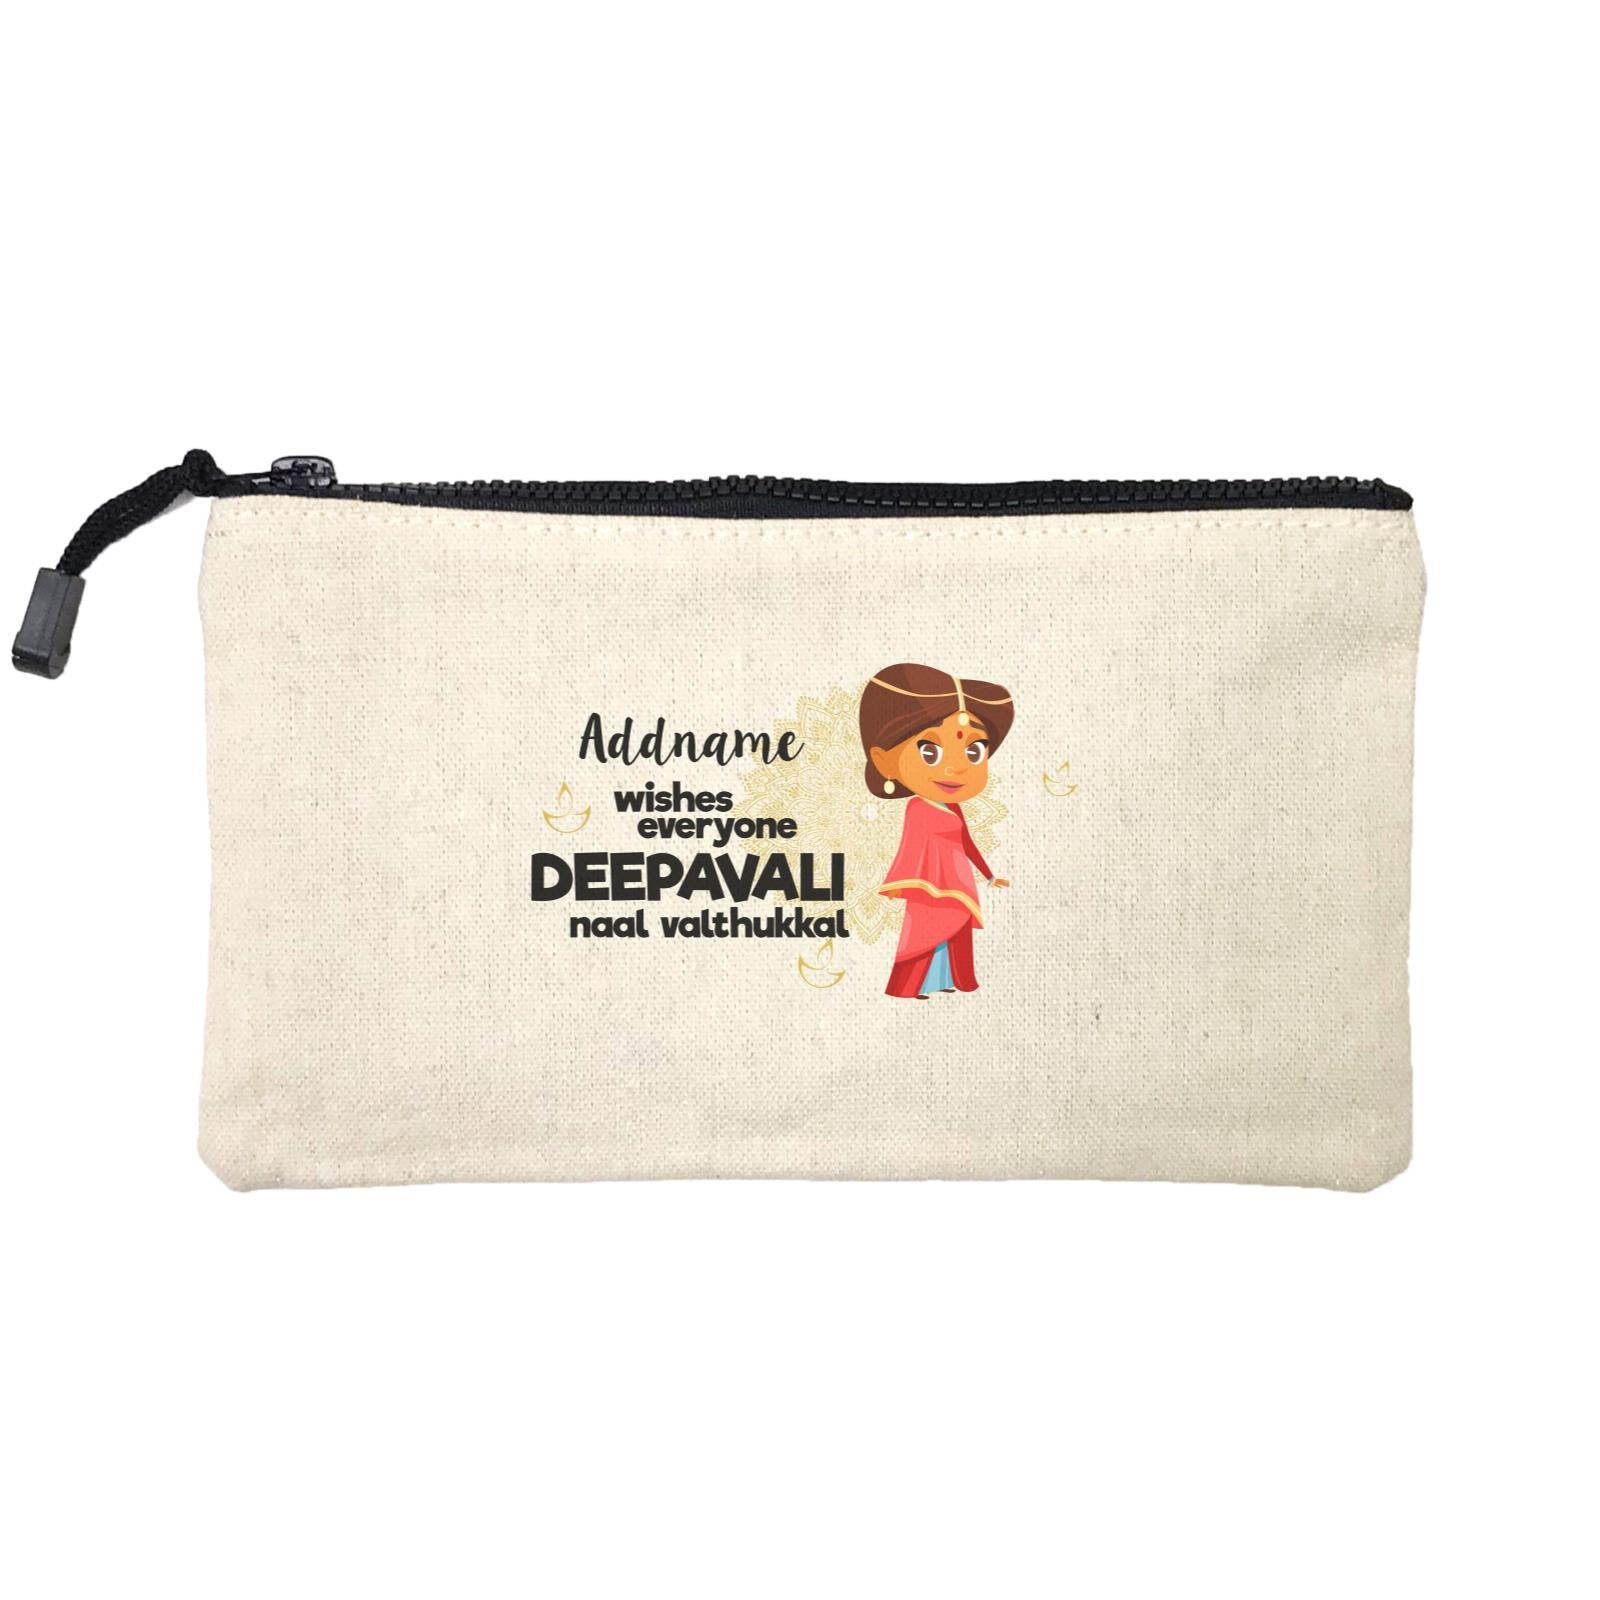 Cute Woman Wishes Everyone Deepavali Addname Mini Accessories Stationery Pouch